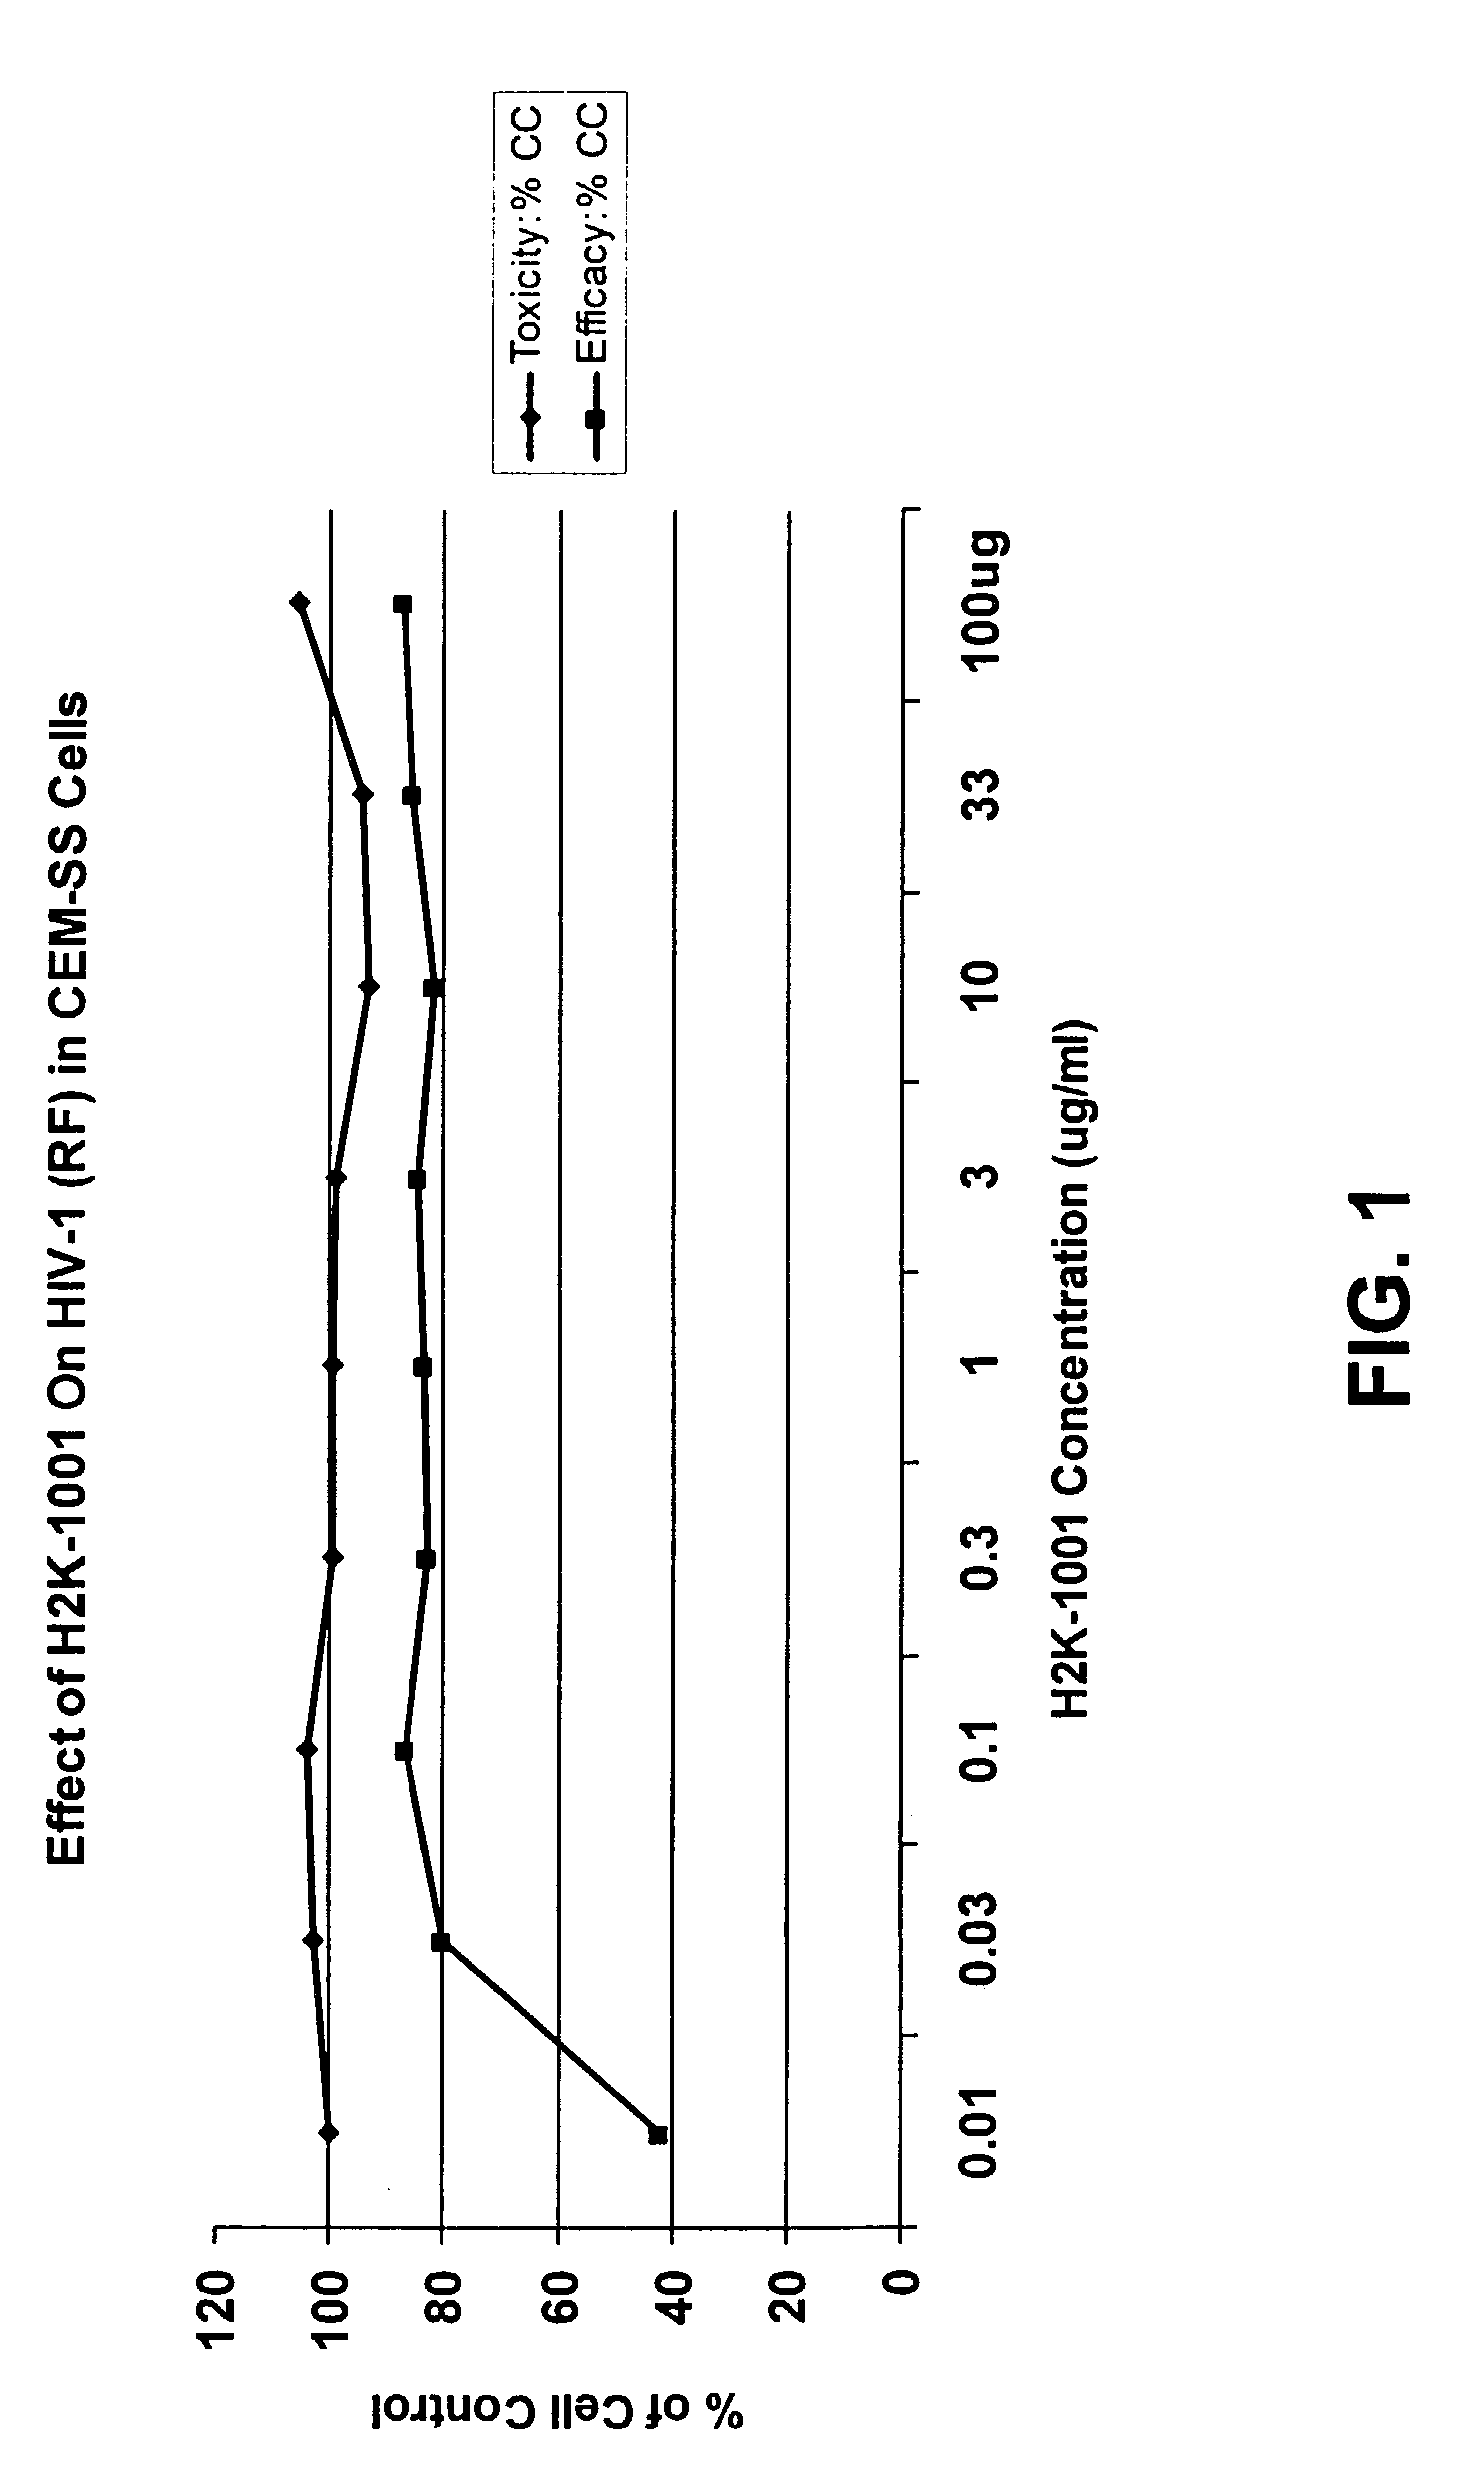 Method and compound for the prophylaxis or treatment of an immunodeficiency condition, such as AIDS